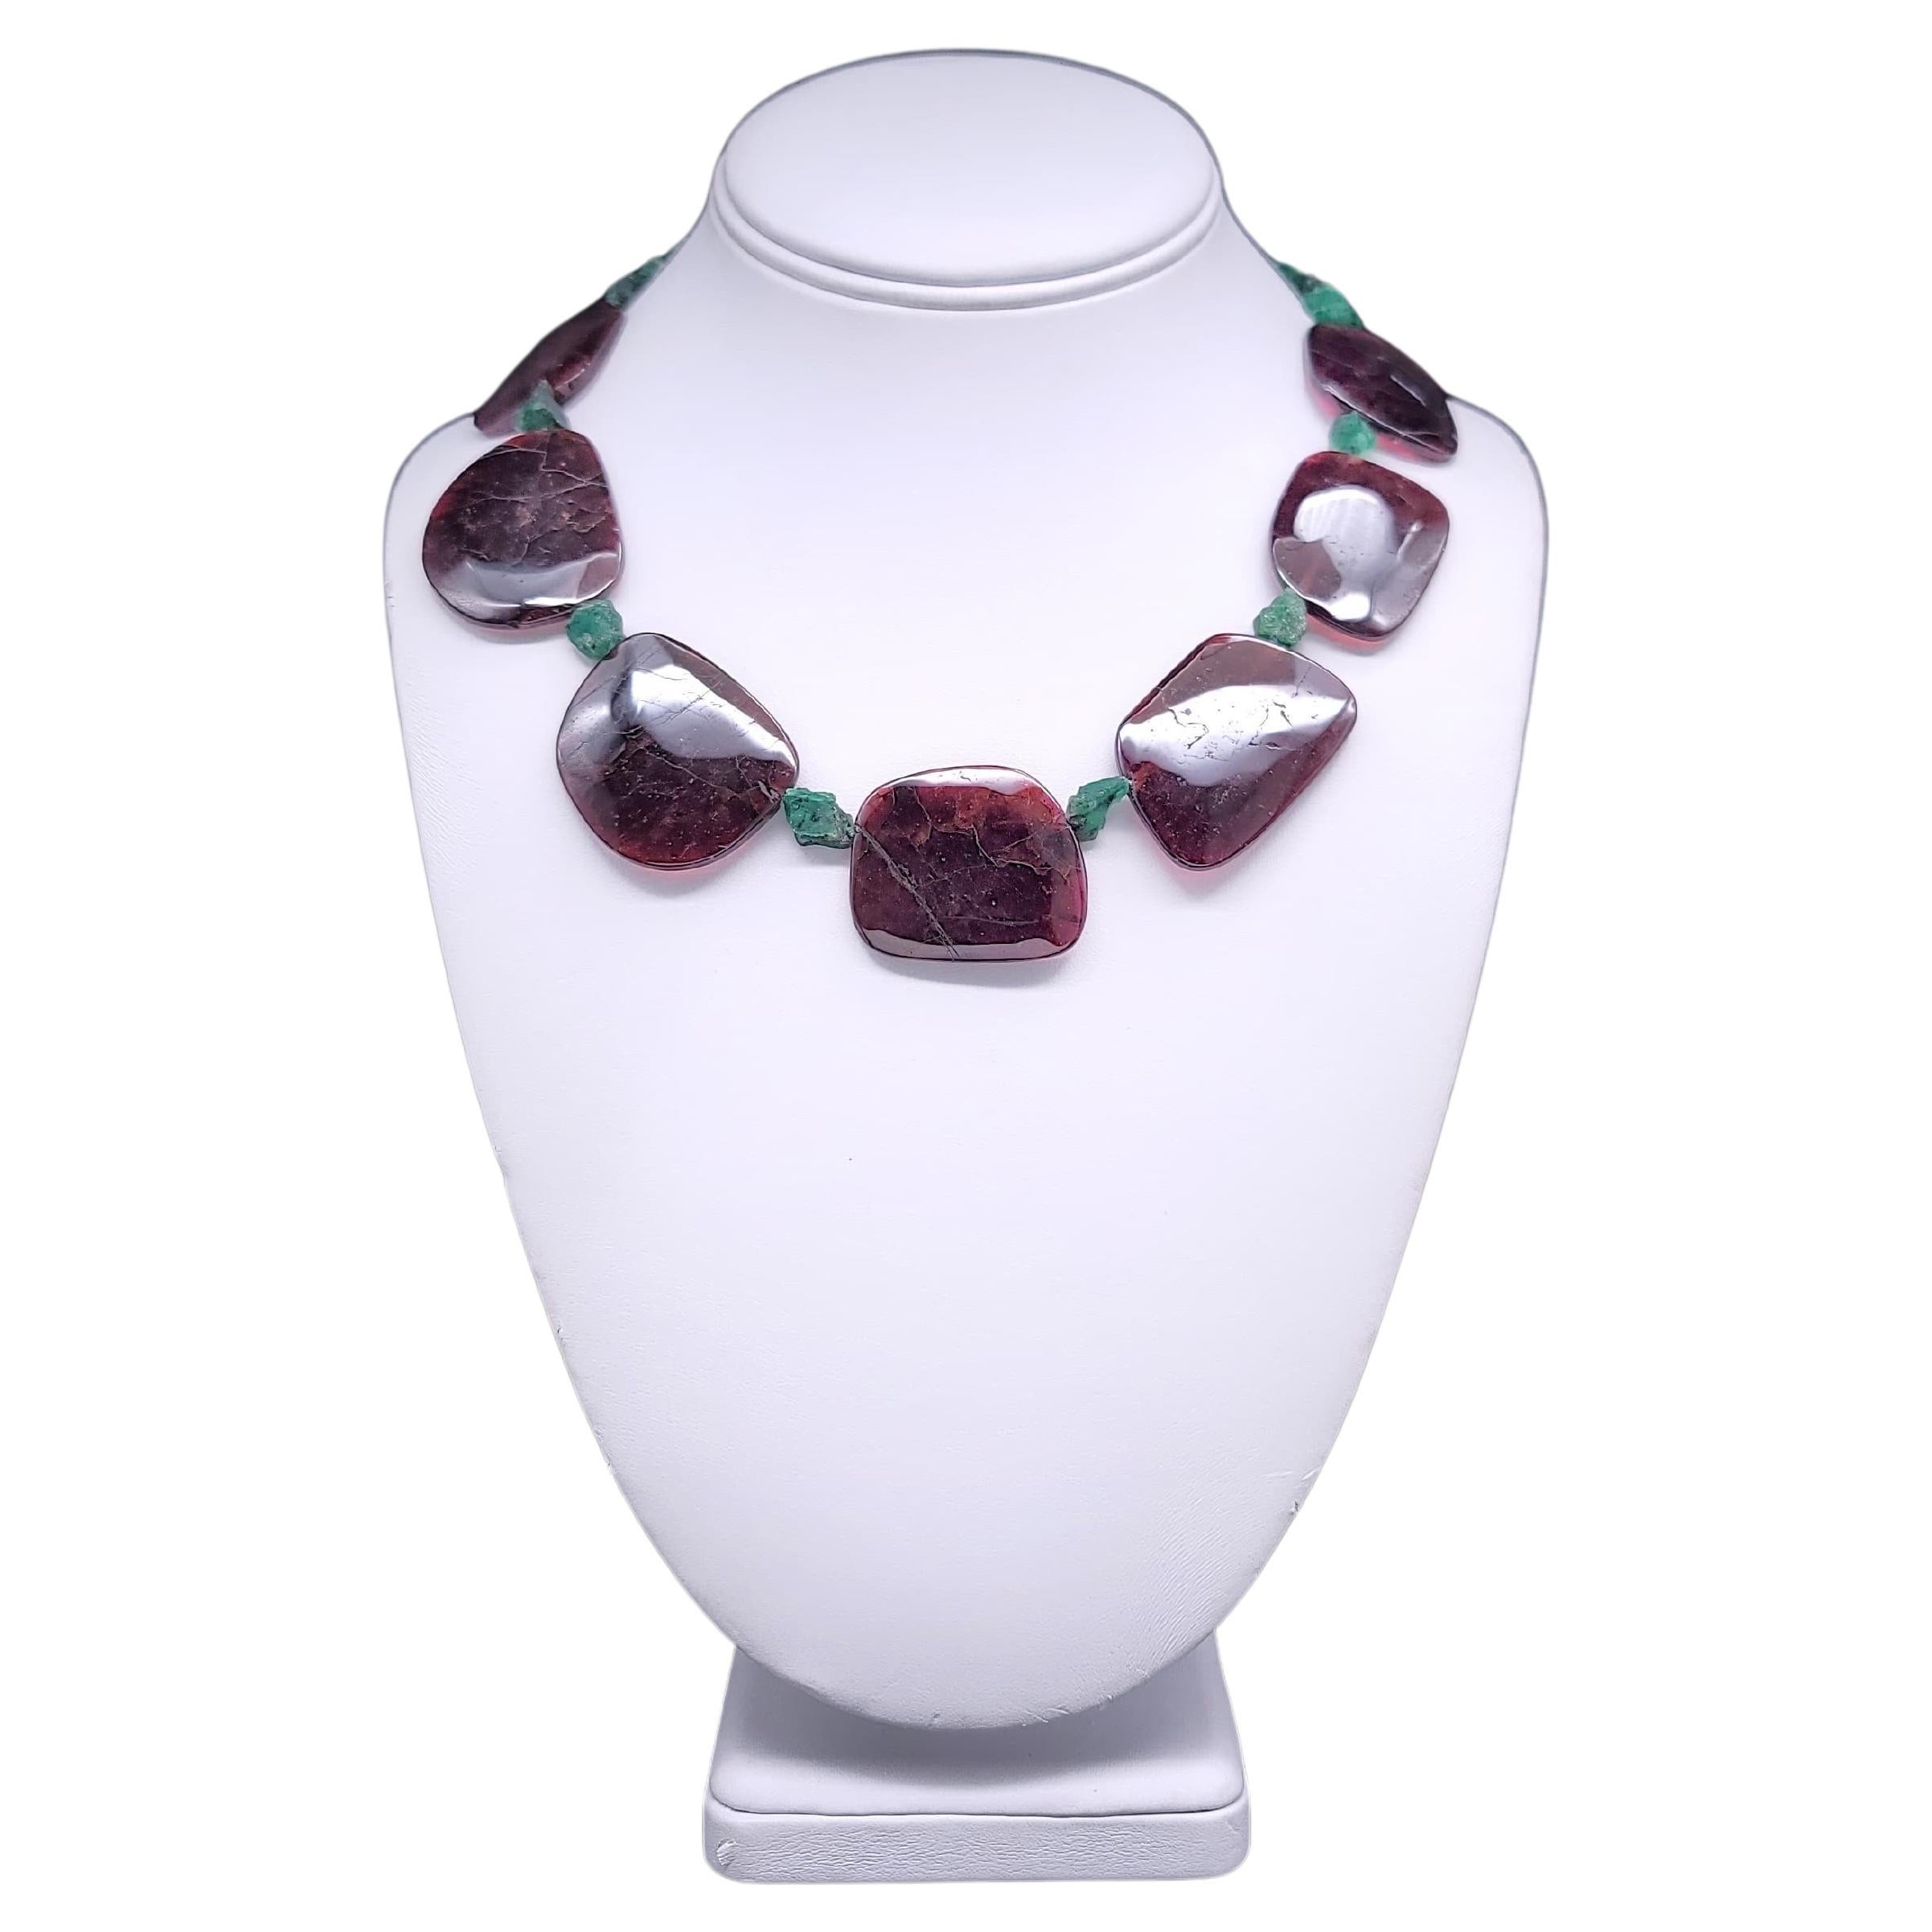 A.Jeschel Unique Polished Garnet Necklace separated by Emeralds nuggets